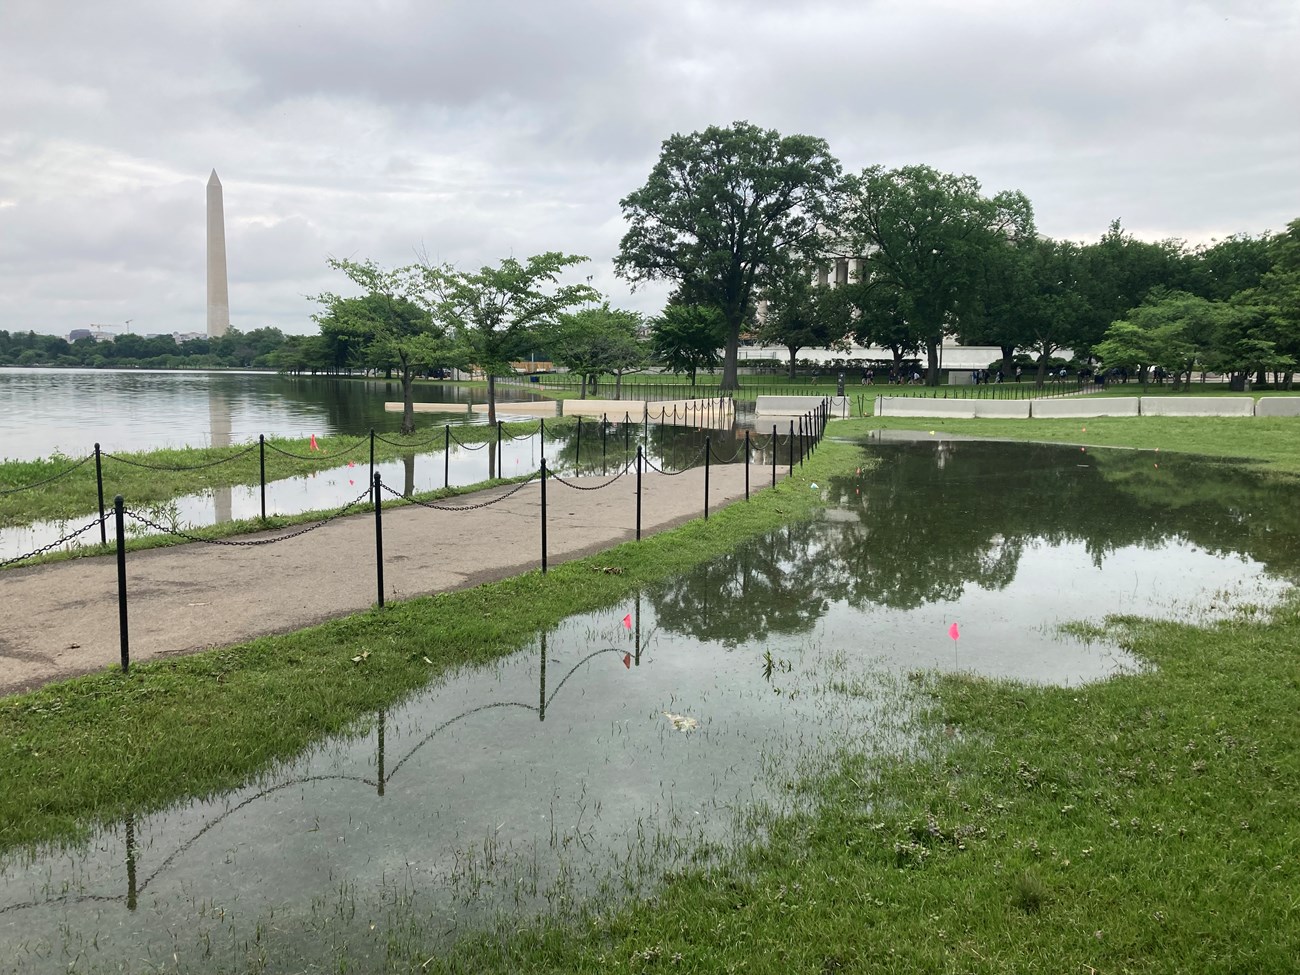 Standing water visible in the grassy foreground areas along a sidewalk on an overcast day with the Washington Monument visible in the background and a few green leafed out trees.